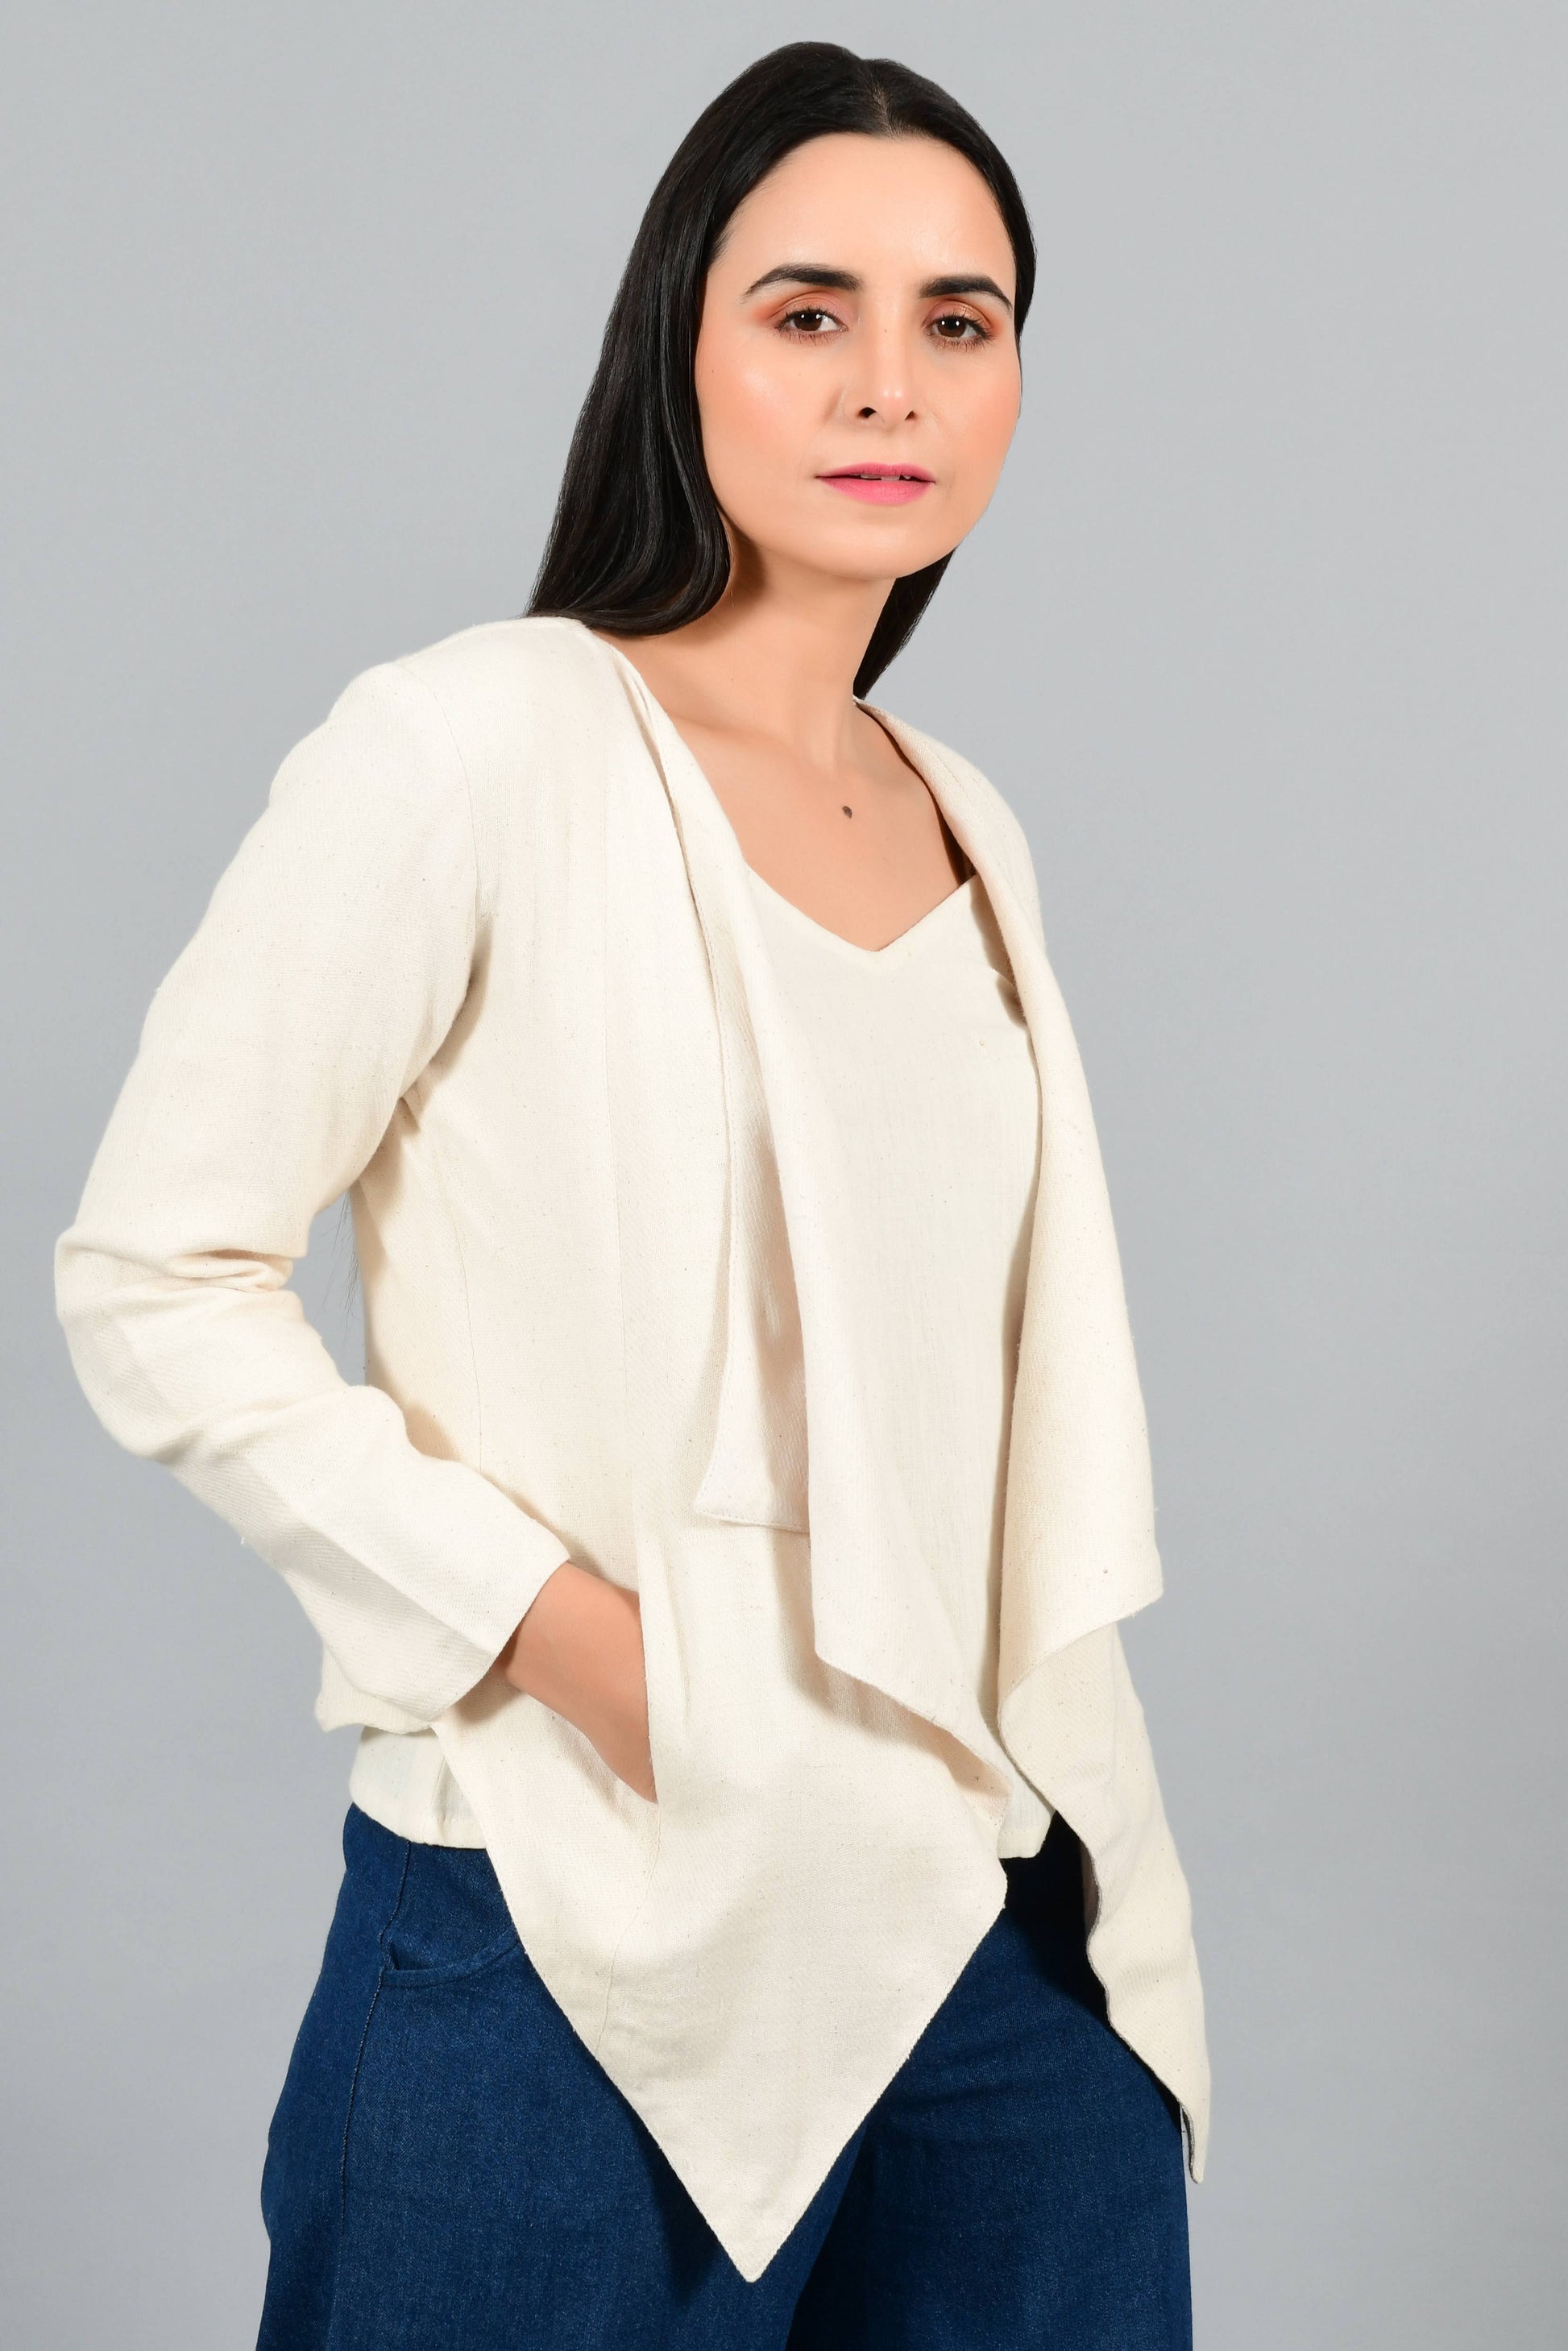 Close Up of an Indian female womenswear fashion model in a short off-white Cashmere Cotton jacket-shrug with extra wide lapels, made using handspun and handwoven khadi cotton by Cotton Rack.